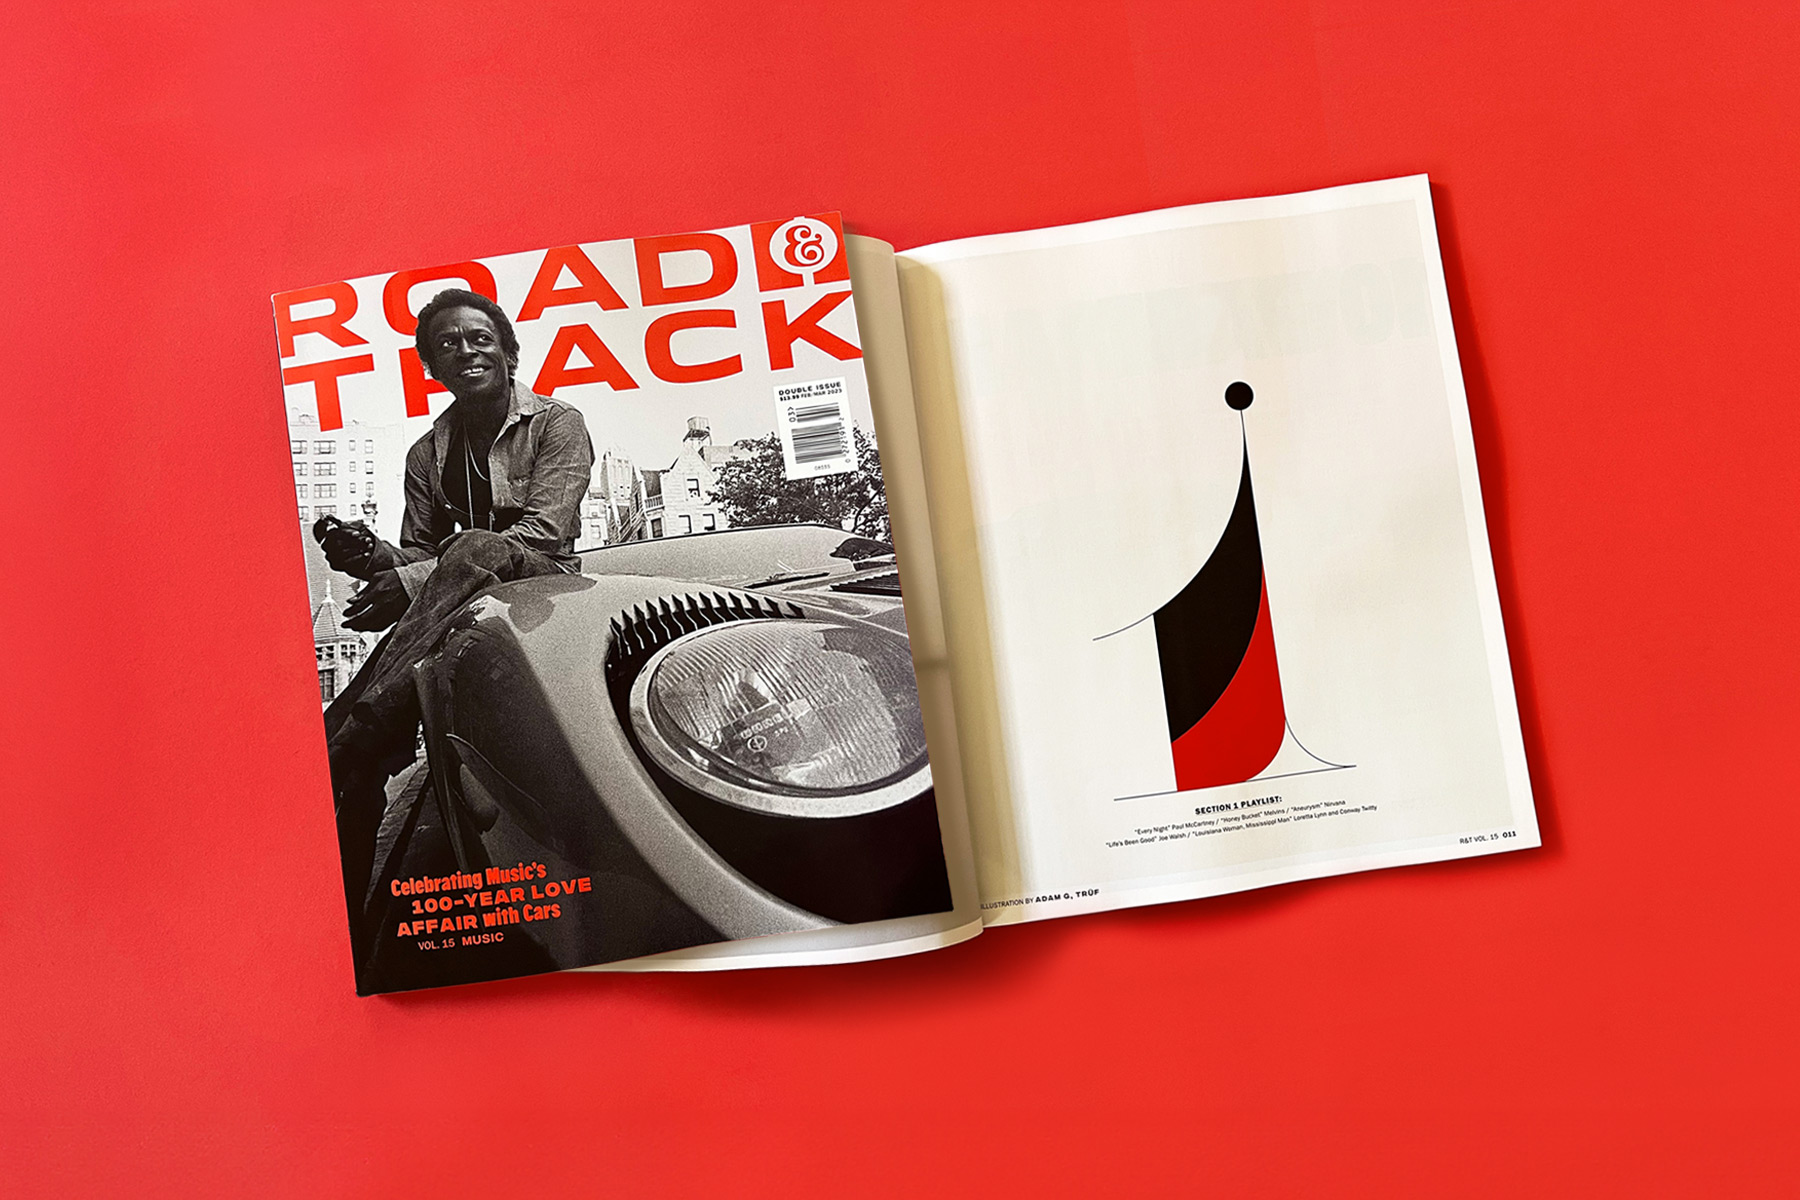 road & track music issue cover with miles davis and spread showing custom number 1 on red